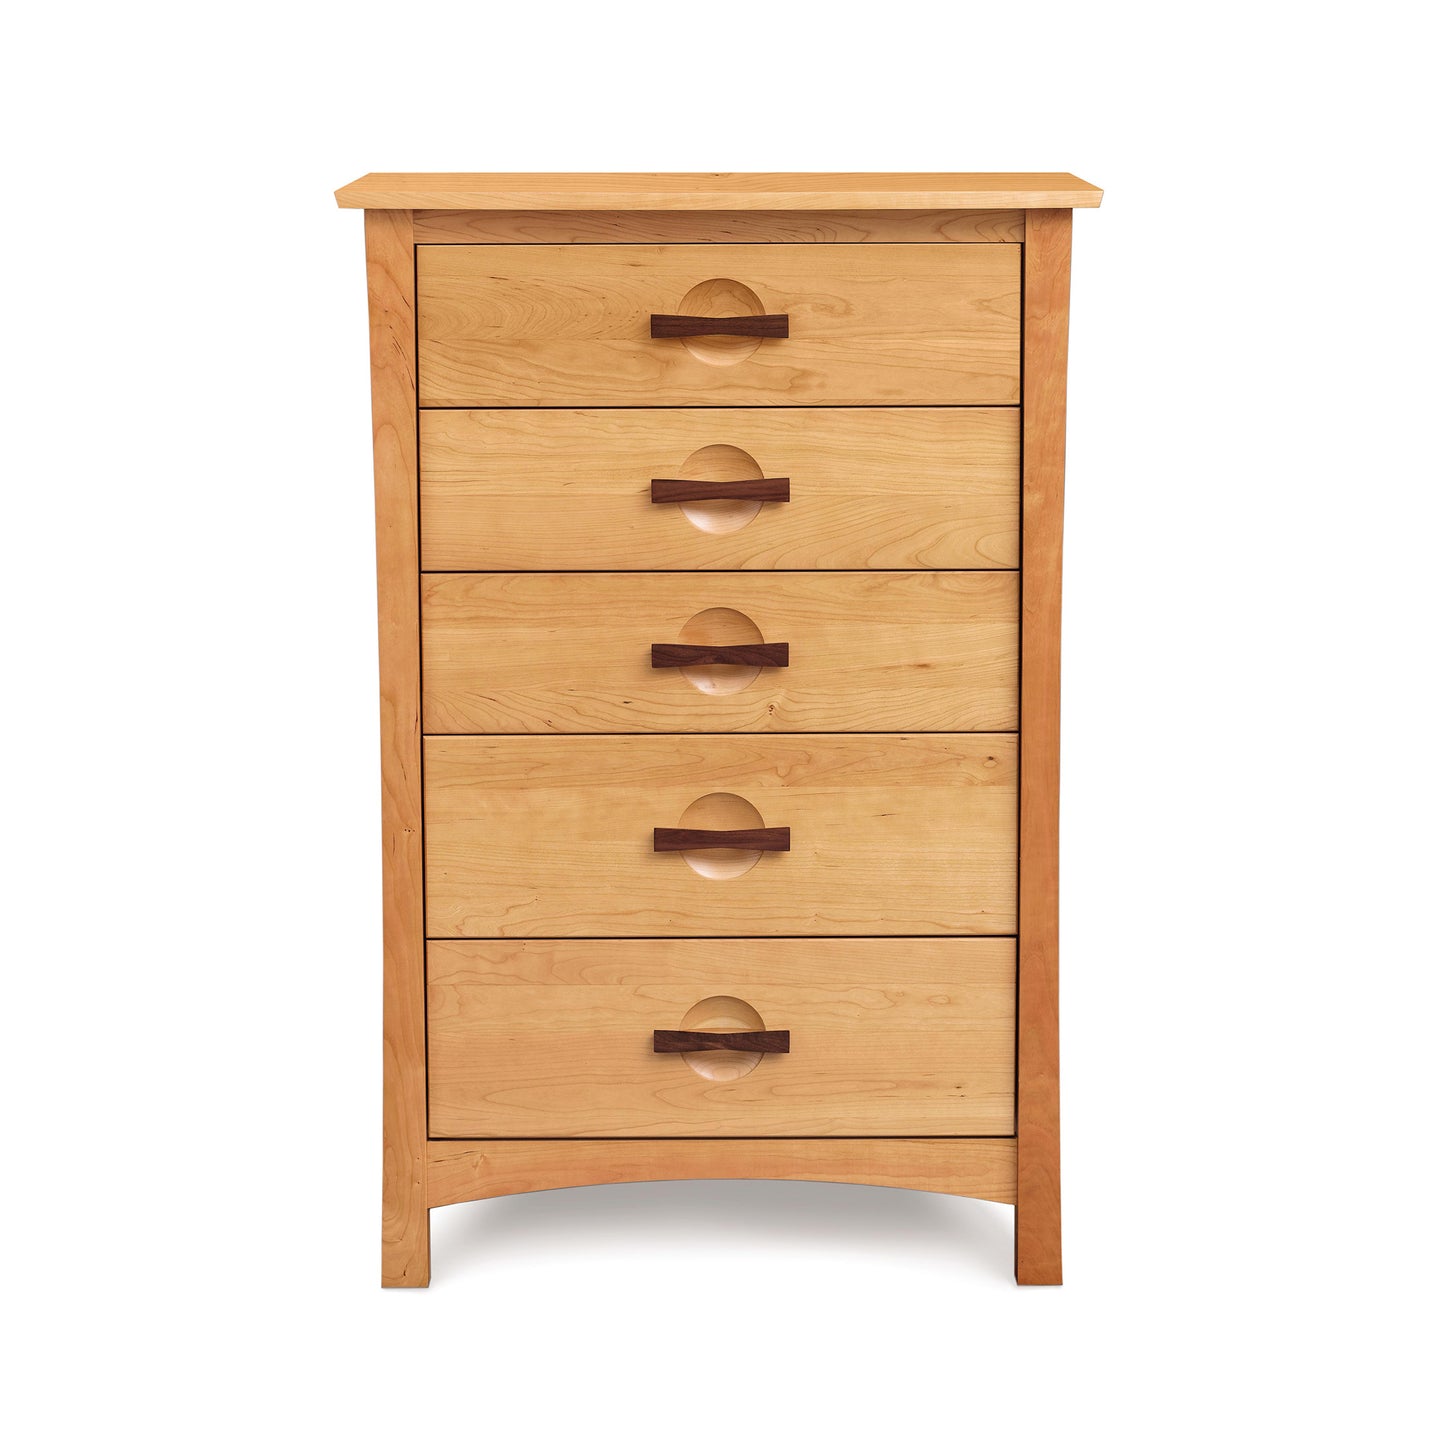 A handmade Copeland Furniture Berkeley 5-Drawer Chest crafted in the American Arts & Crafts style with sustainably harvested woods.